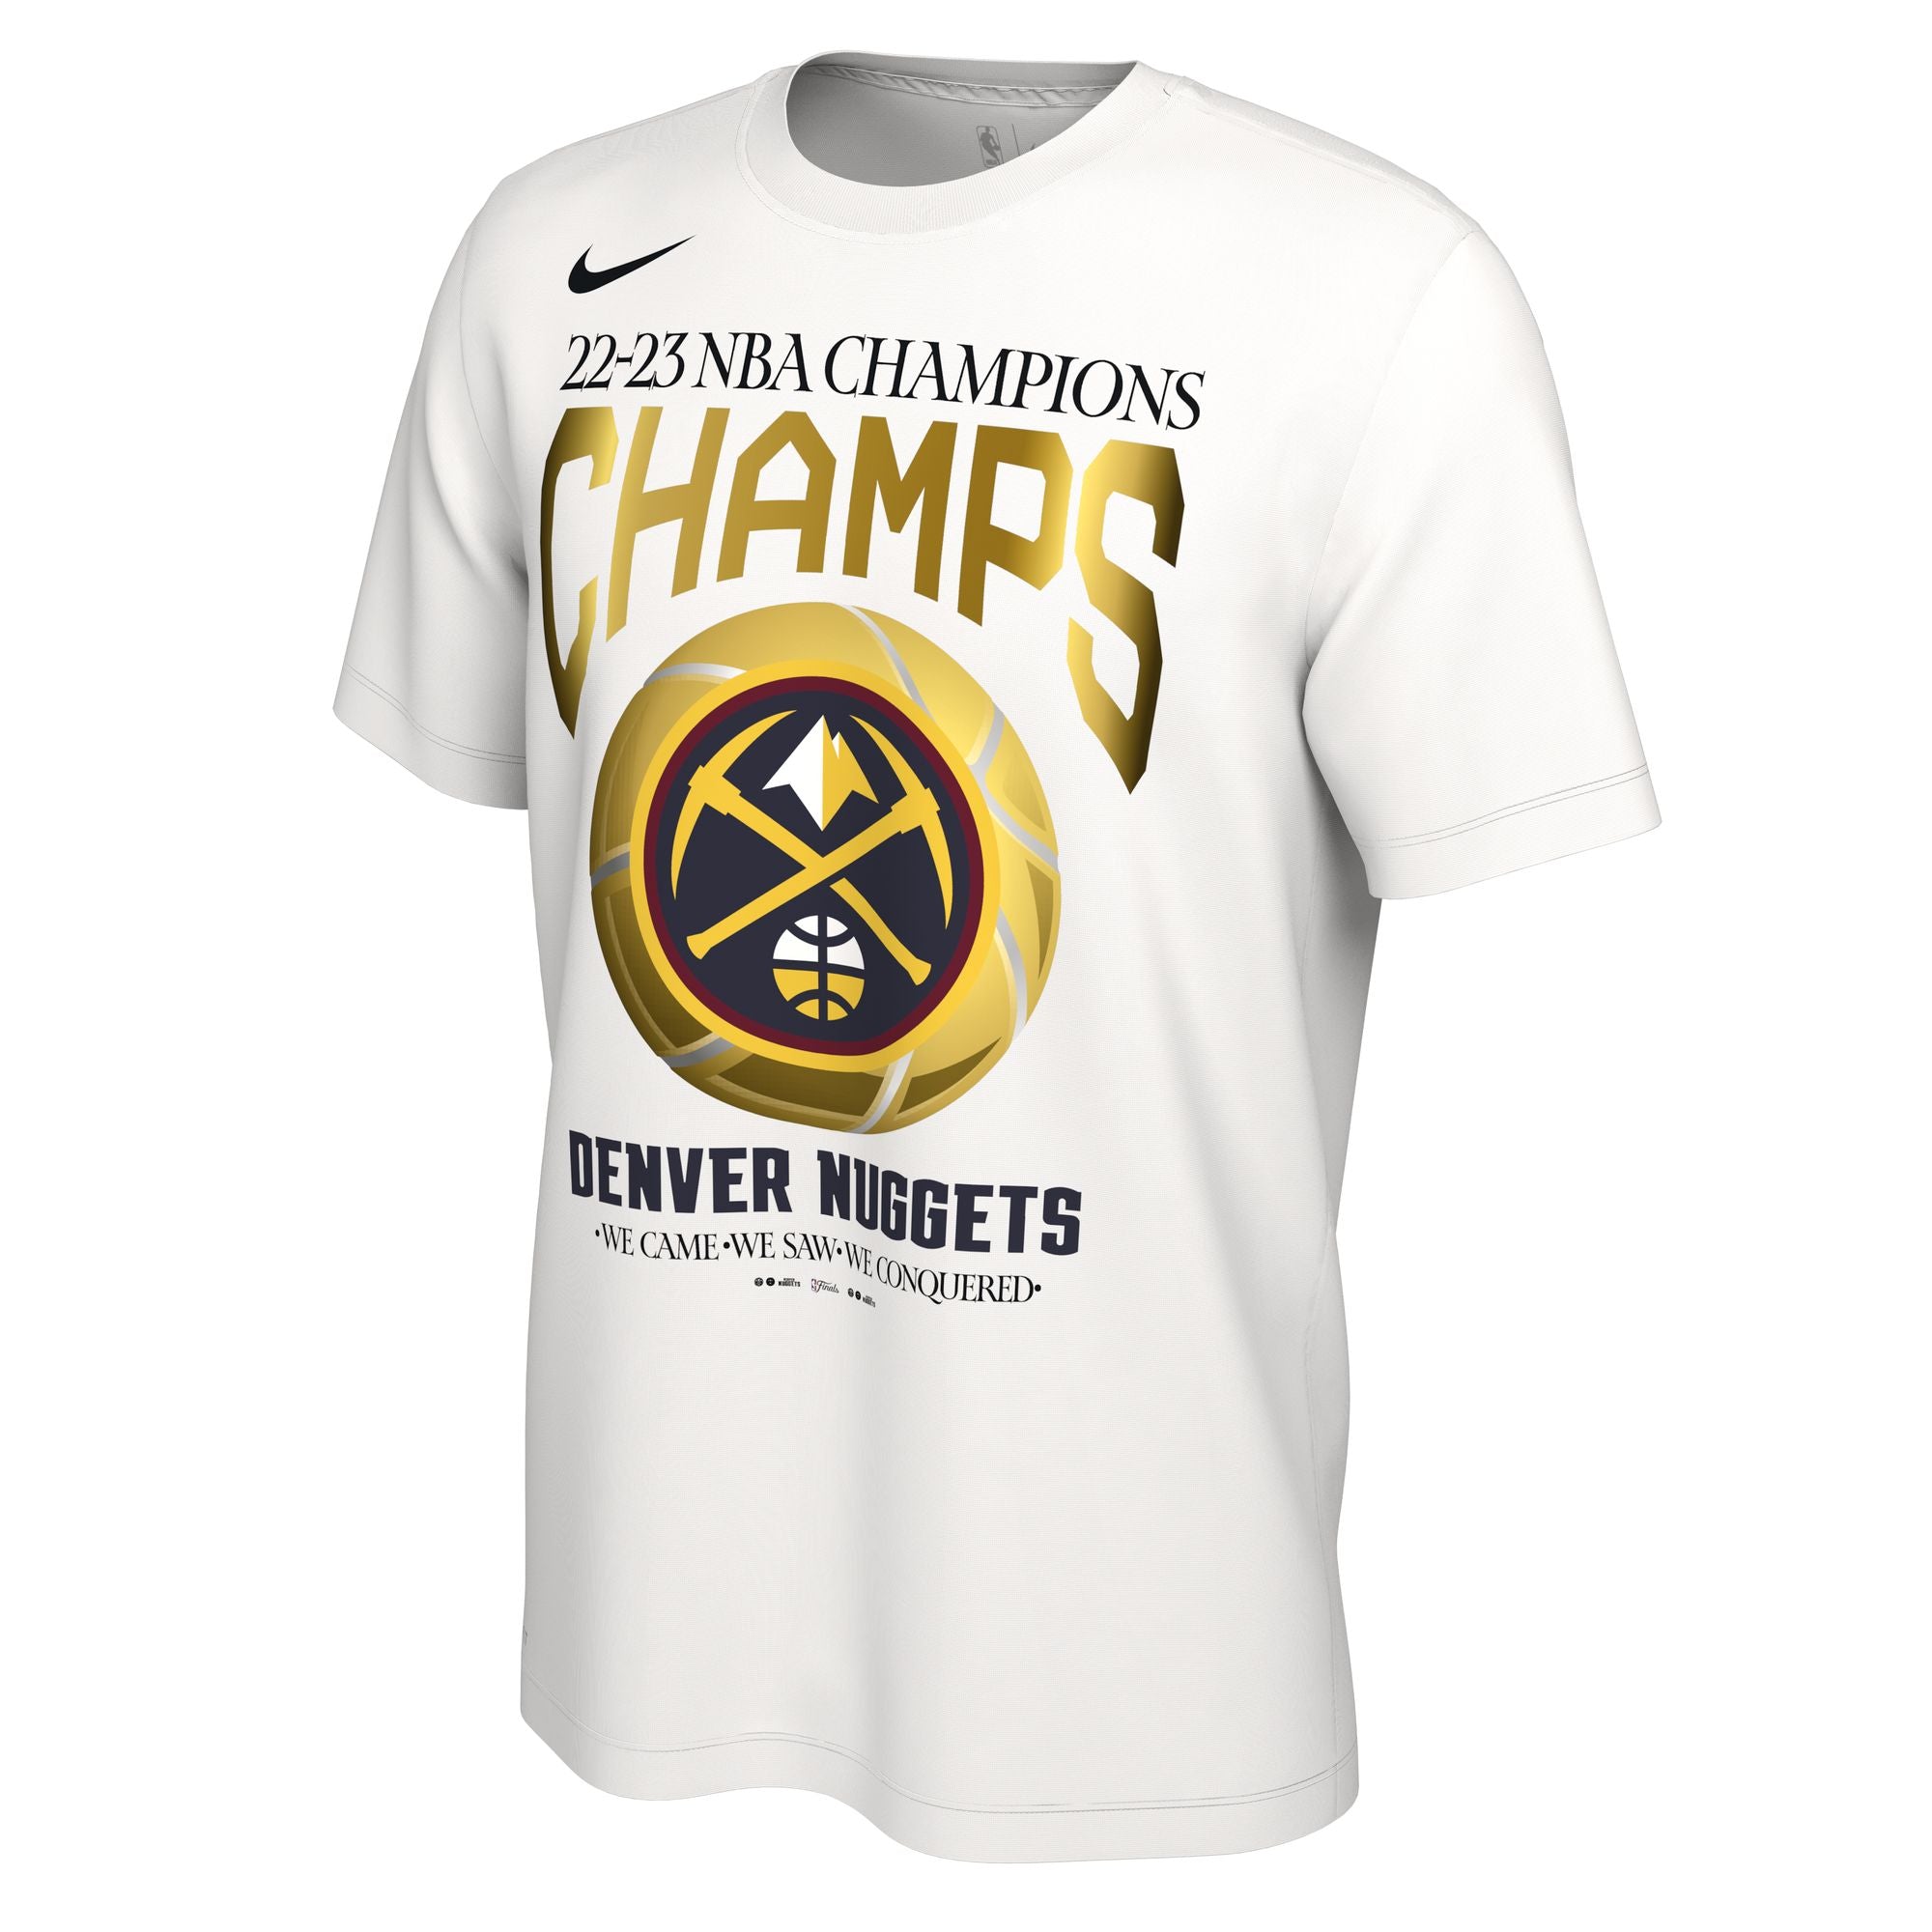 Denver Nuggets and Colorado Avalanche we are the champions shirt